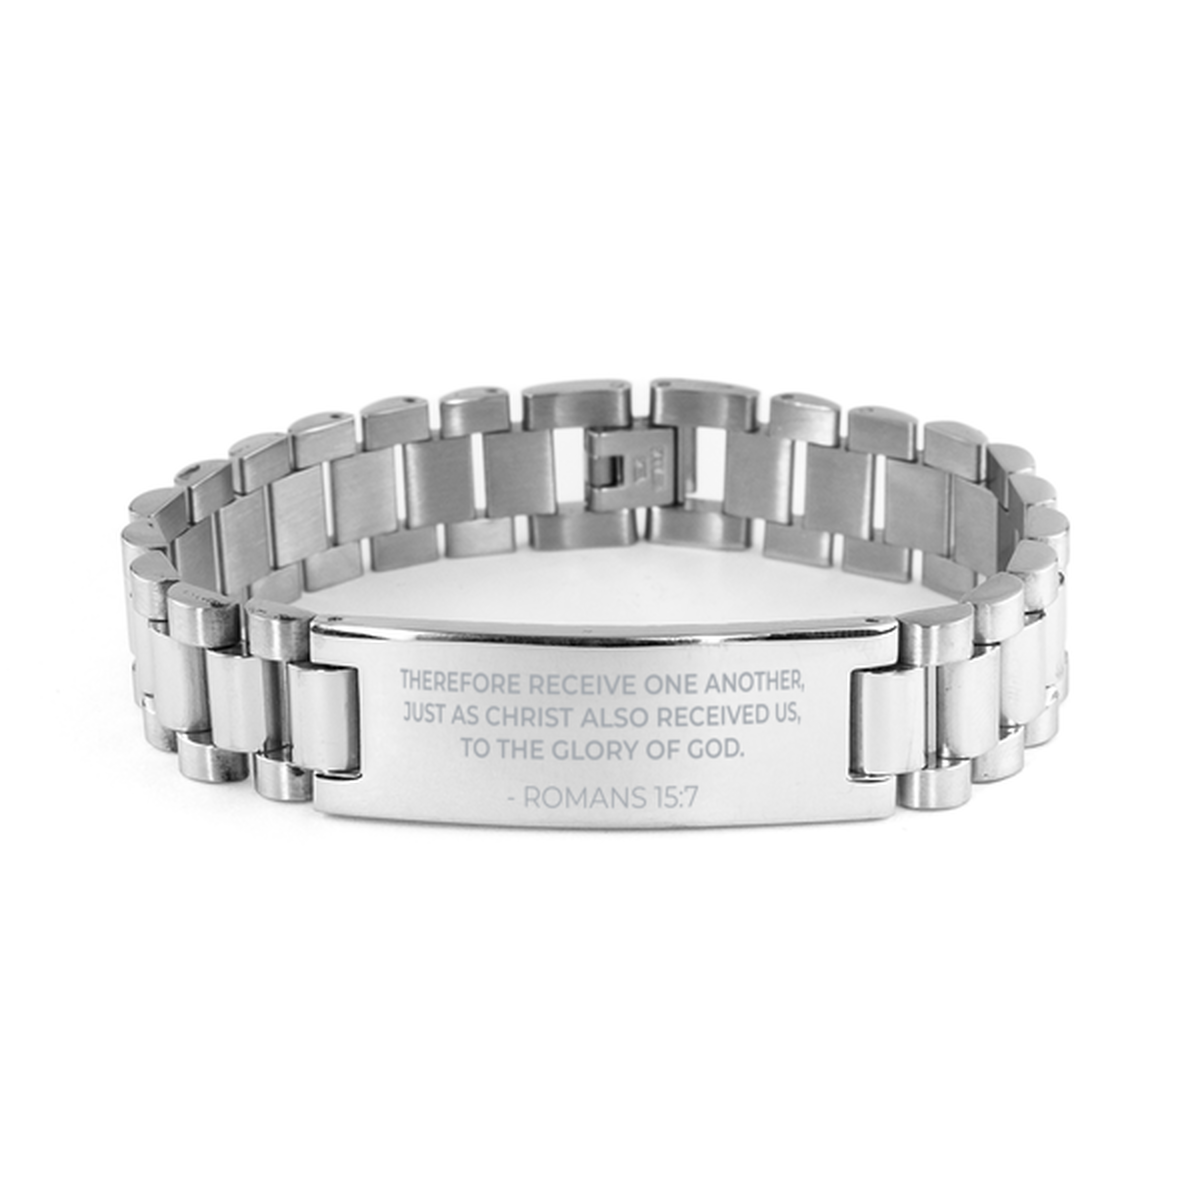 Christian Ladder Stainless Steel Bracelet, Romans 15:7 Therefore Receive One Another, Just As Christ, Motivational Bible Verse Gifts For Men Women